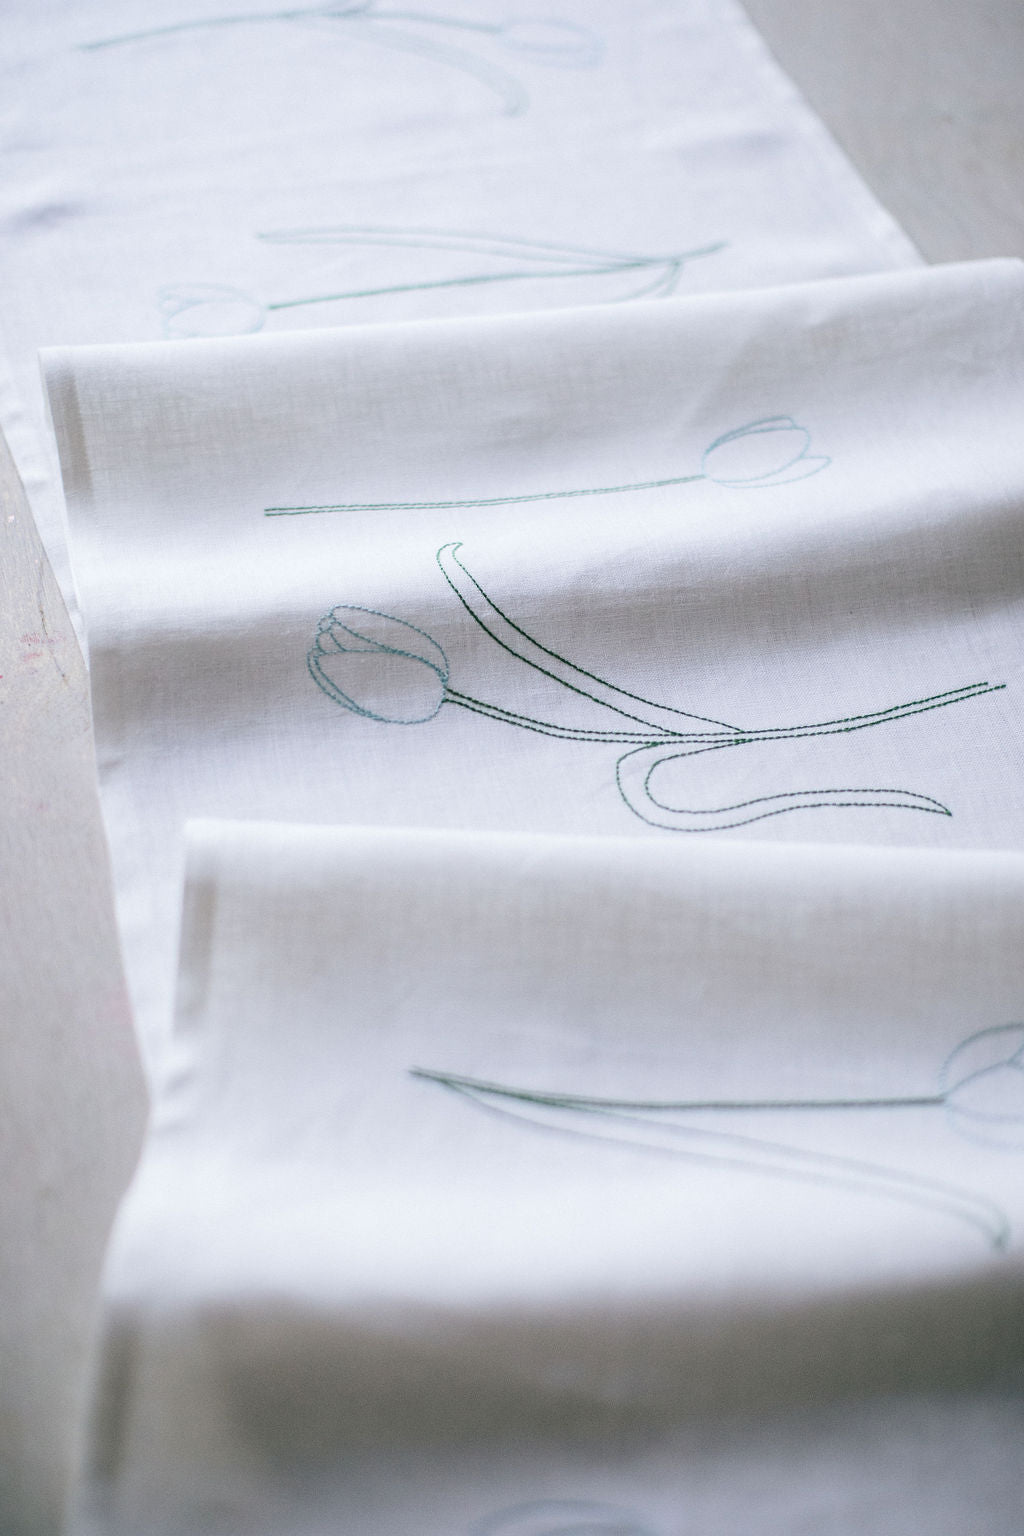 Tulip Embroidered Irish Linen Table Runner in Ivory